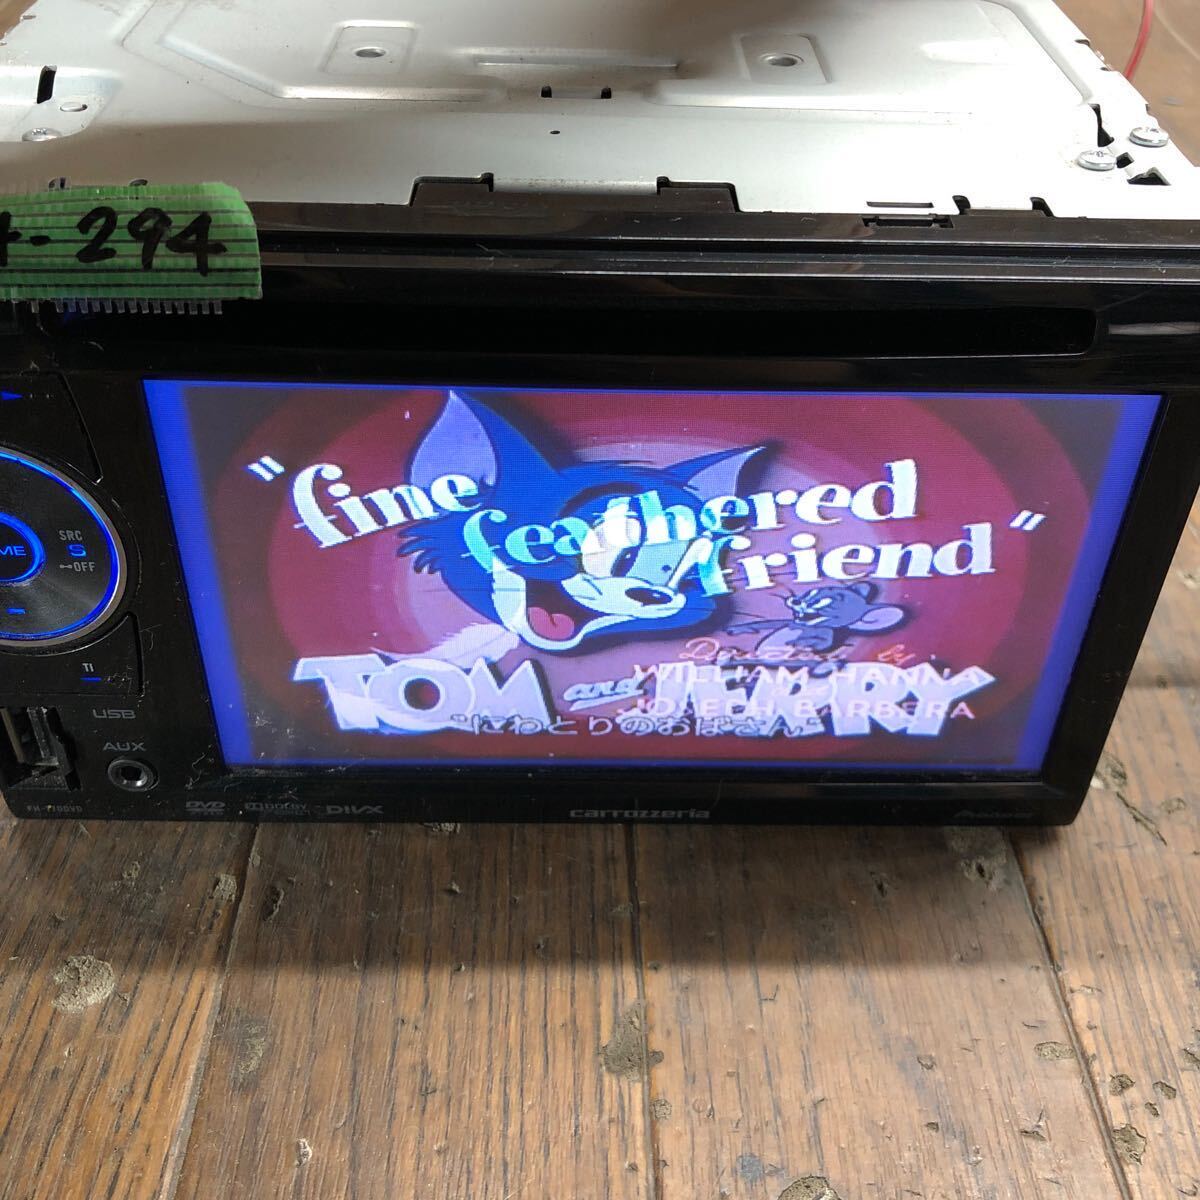 AV4-294 super-discount car stereo DVD player Carrozzeria Pioneer FH-770DVD LDPG019278JP CD DVD USB body only simple operation verification ending used present condition goods 